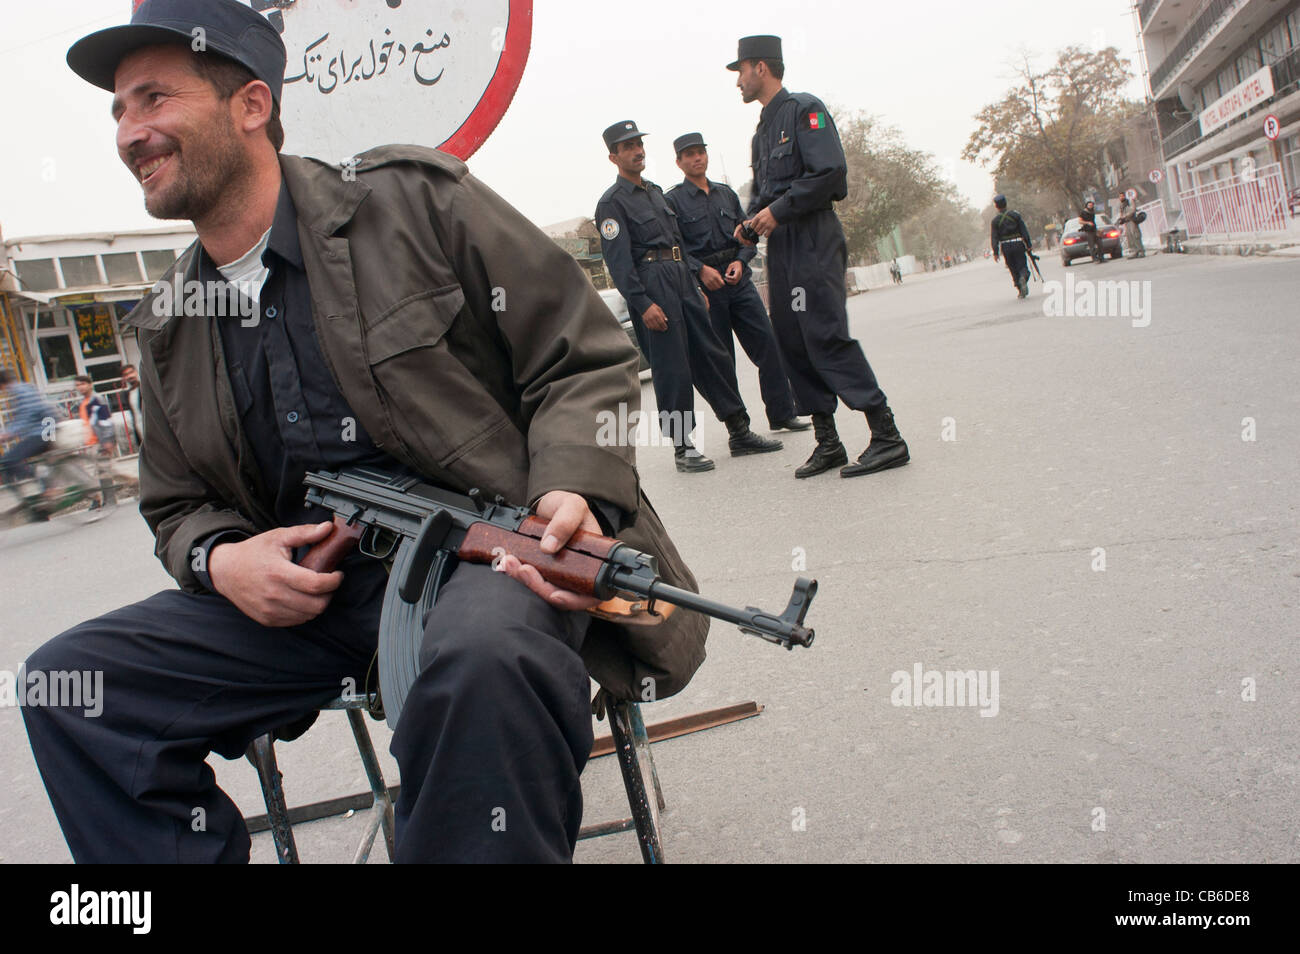 Members of the Afghan National Police (ANP) guarding a street in Kabul, Afghanistan, October 2004. Stock Photo